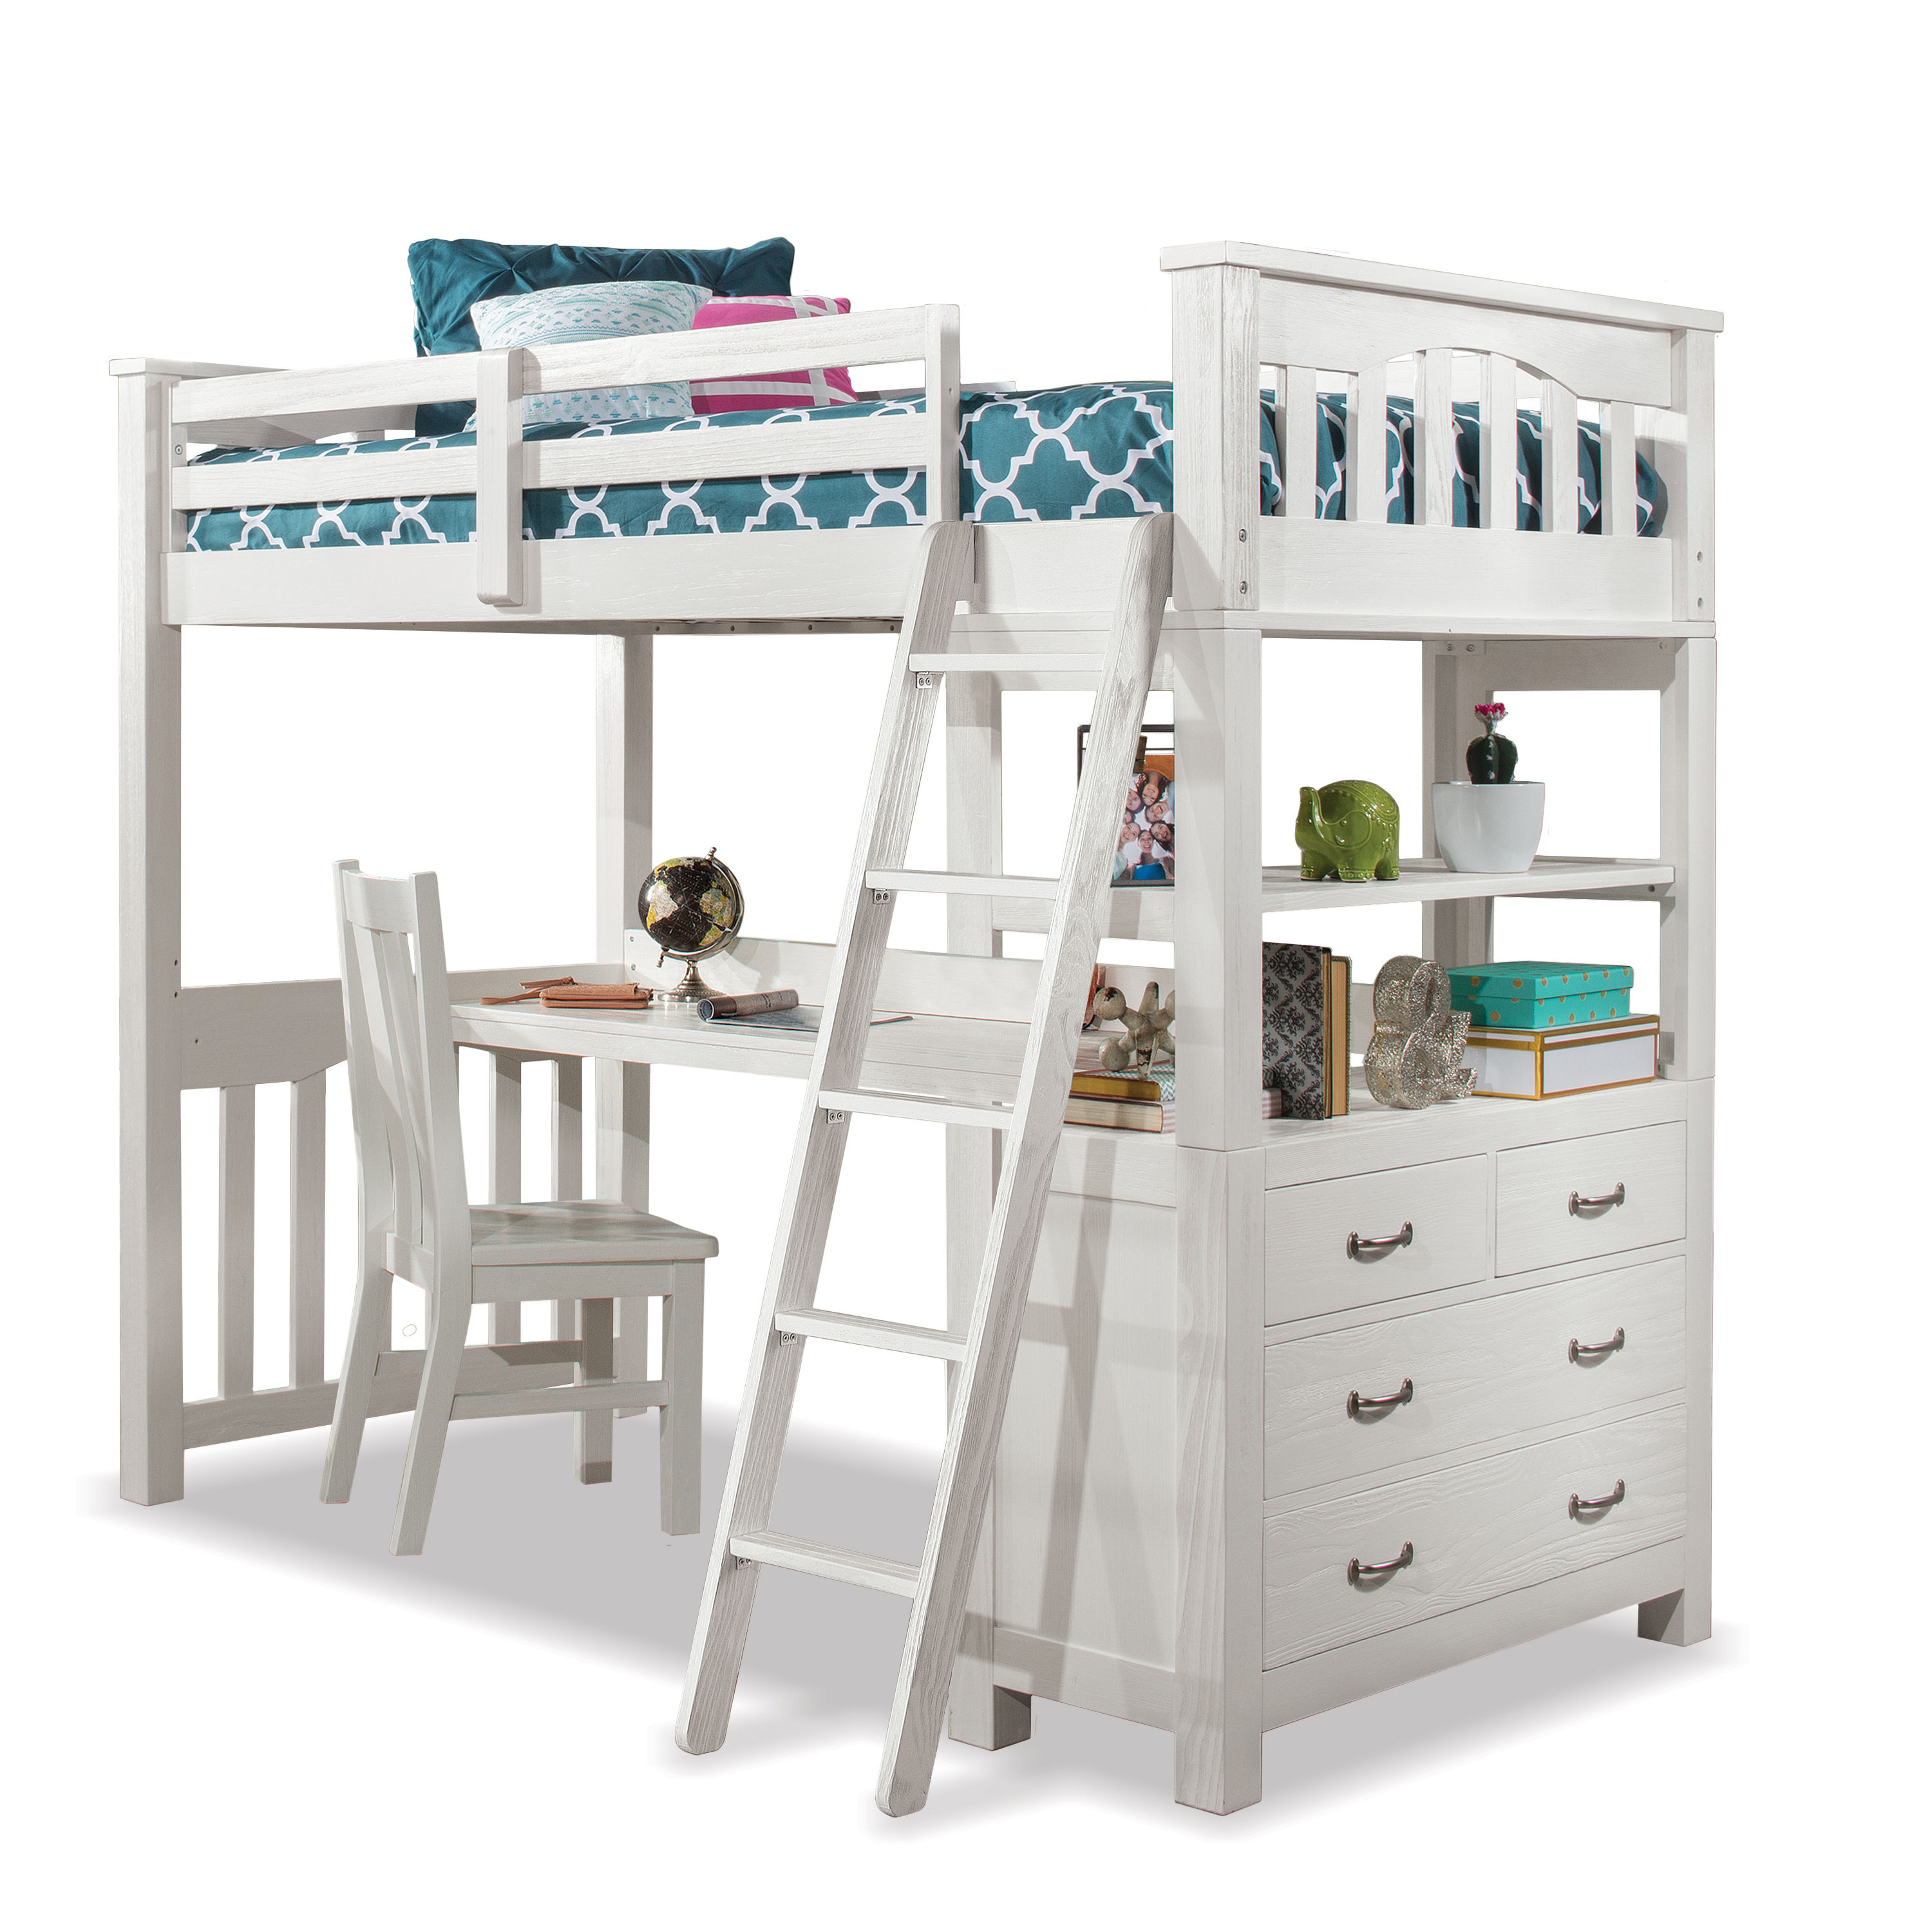 Highlands Wood Twin Loft Bed with Desk and Chair